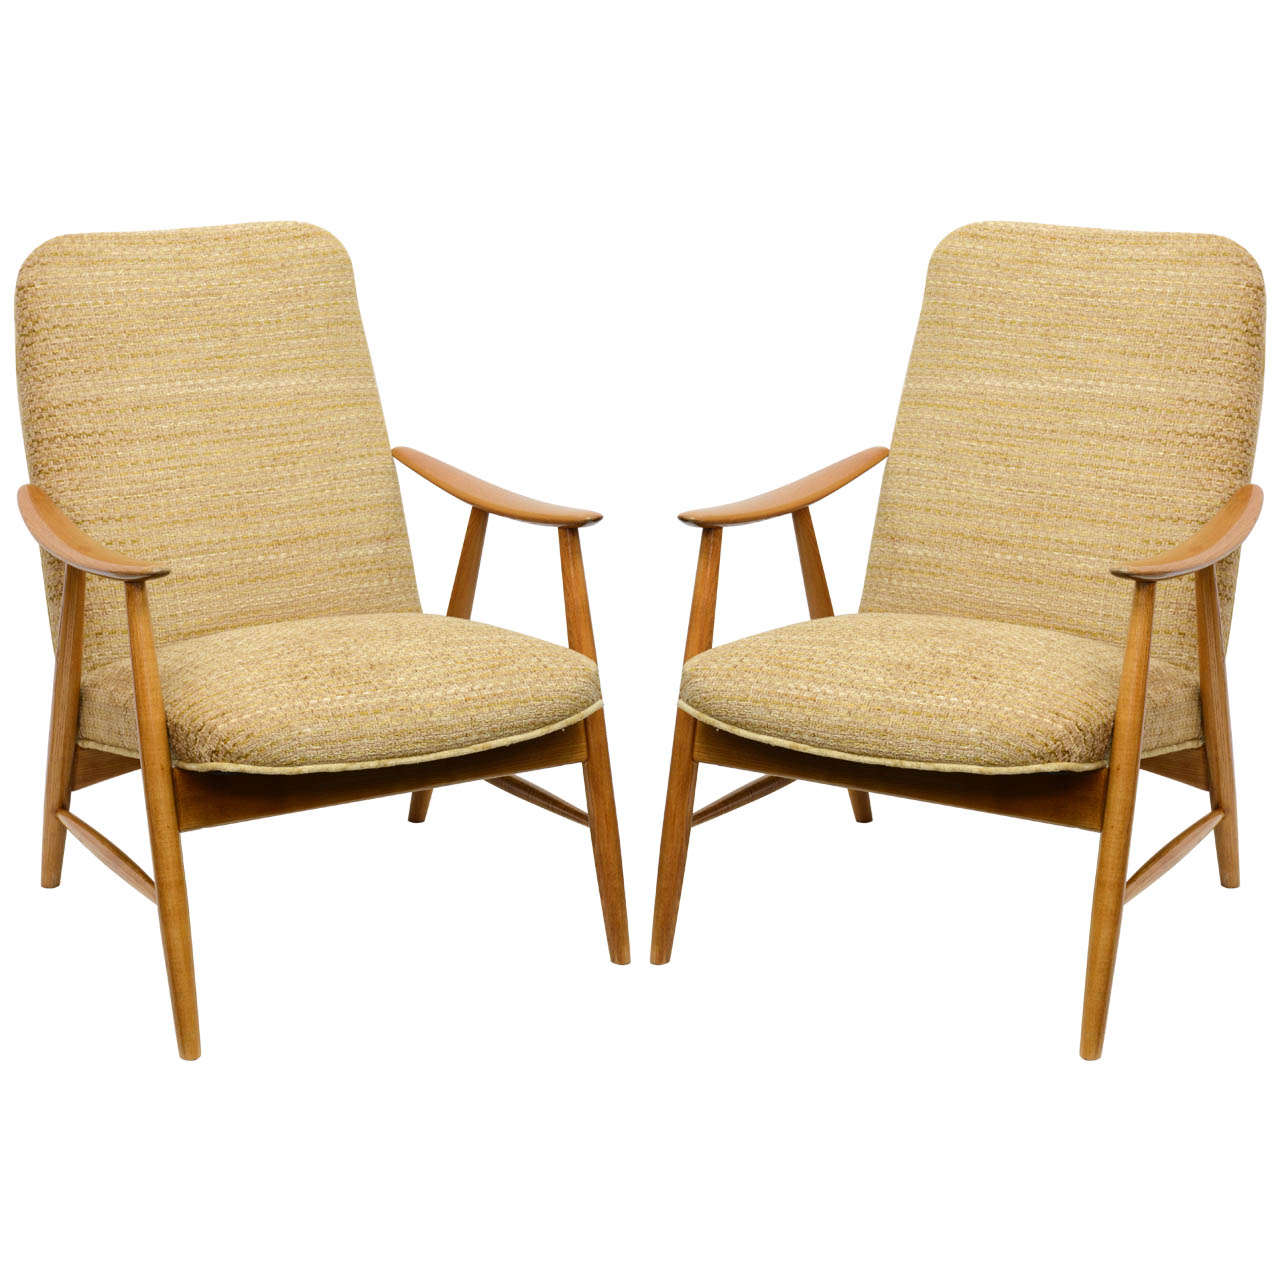 Pair of Mid-Century Modern Armchairs in a style of Juhl, Grete Jalk and Wegner